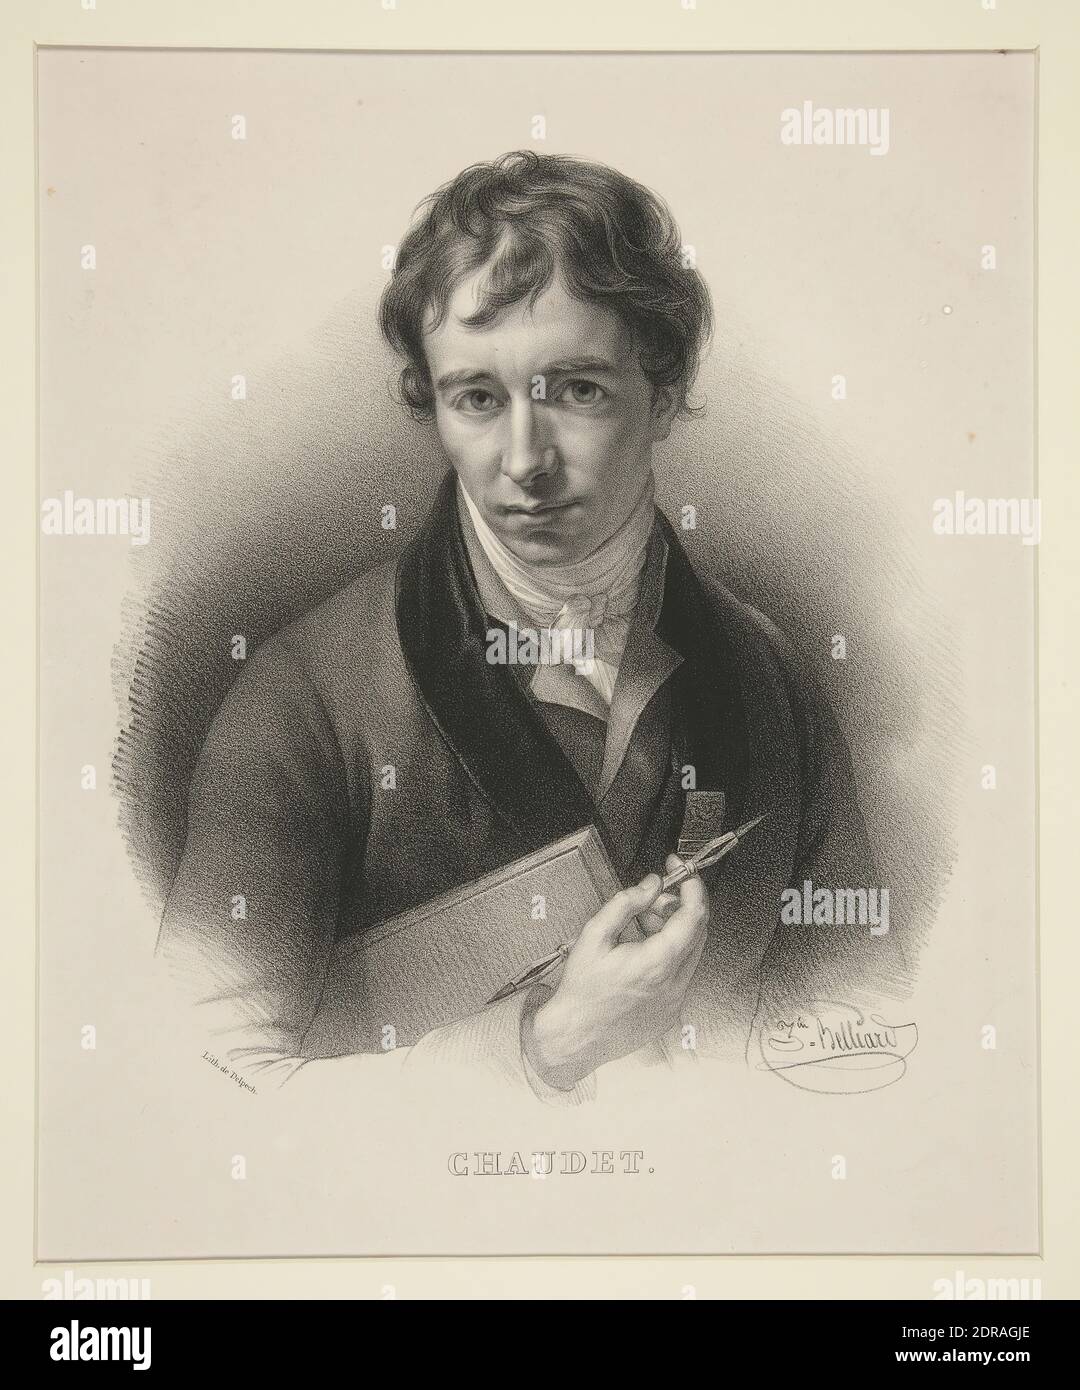 Artist: François-Séraphin Delpech, French, 1778–1825, After: Zéphirin Félix Jean Marius Belliard, French, 1798–1843, Portrait of Chaudet, Lithograph, Sheet: 50.5 × 32.5 cm (19 7/8 × 12 13/16 in.), French, 19th century, Works on Paper - Prints Stock Photo